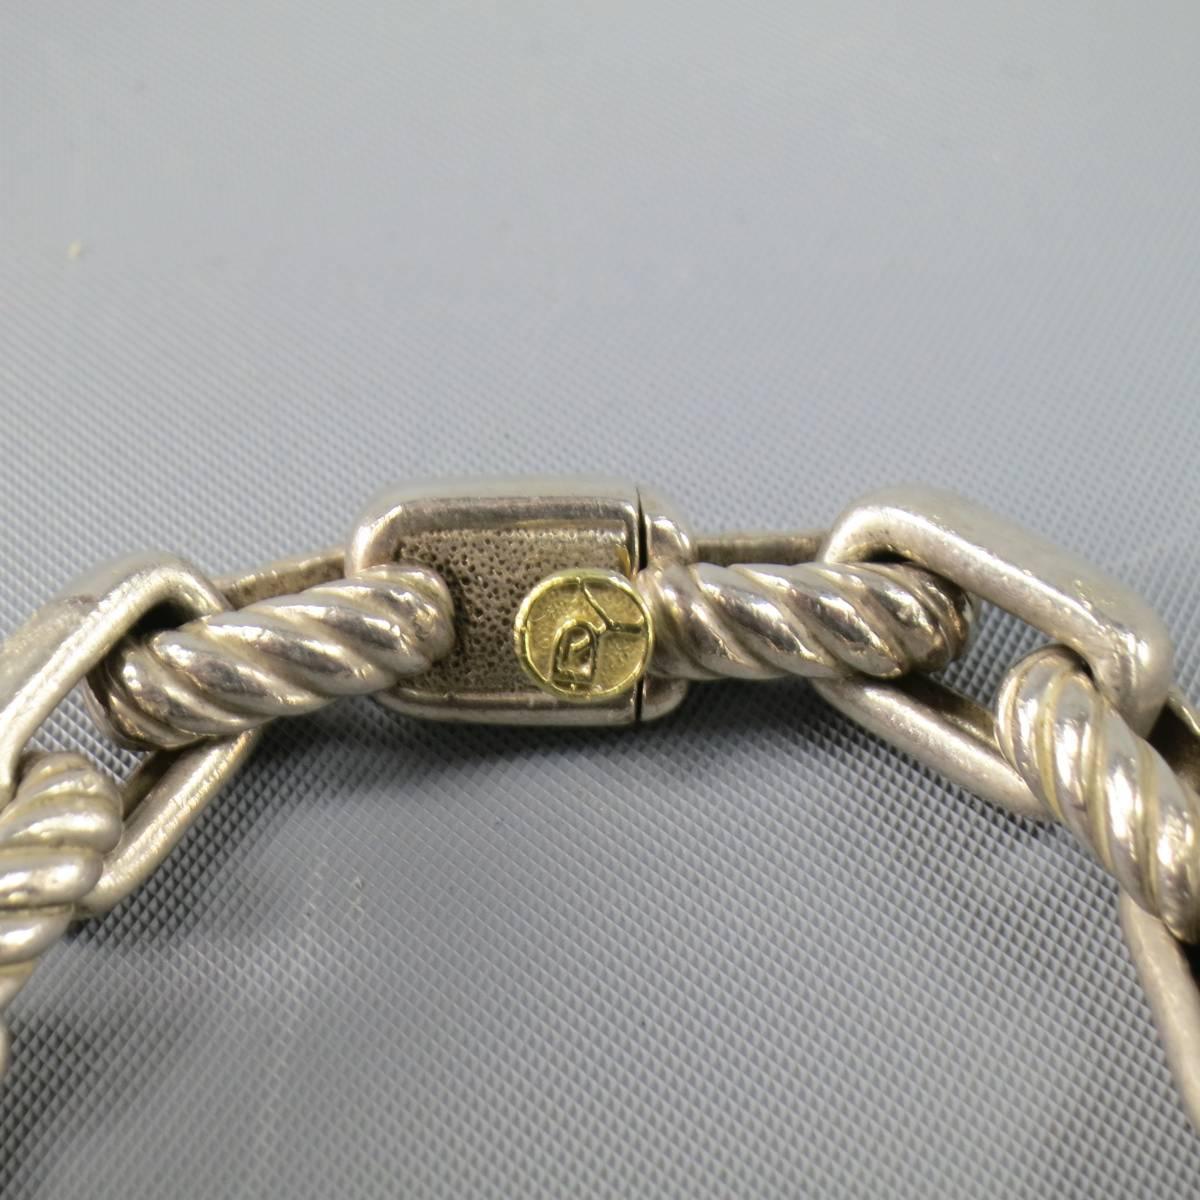 DAVID YURMAN matter sterling silver bracelet in a large rectangular chain with textured and smooth links with 14k gold closure detail.
Retails at $450.00.

Good Pre-Owned Condition.
Marked: 925 / 750
 
Length: 8.5 in.